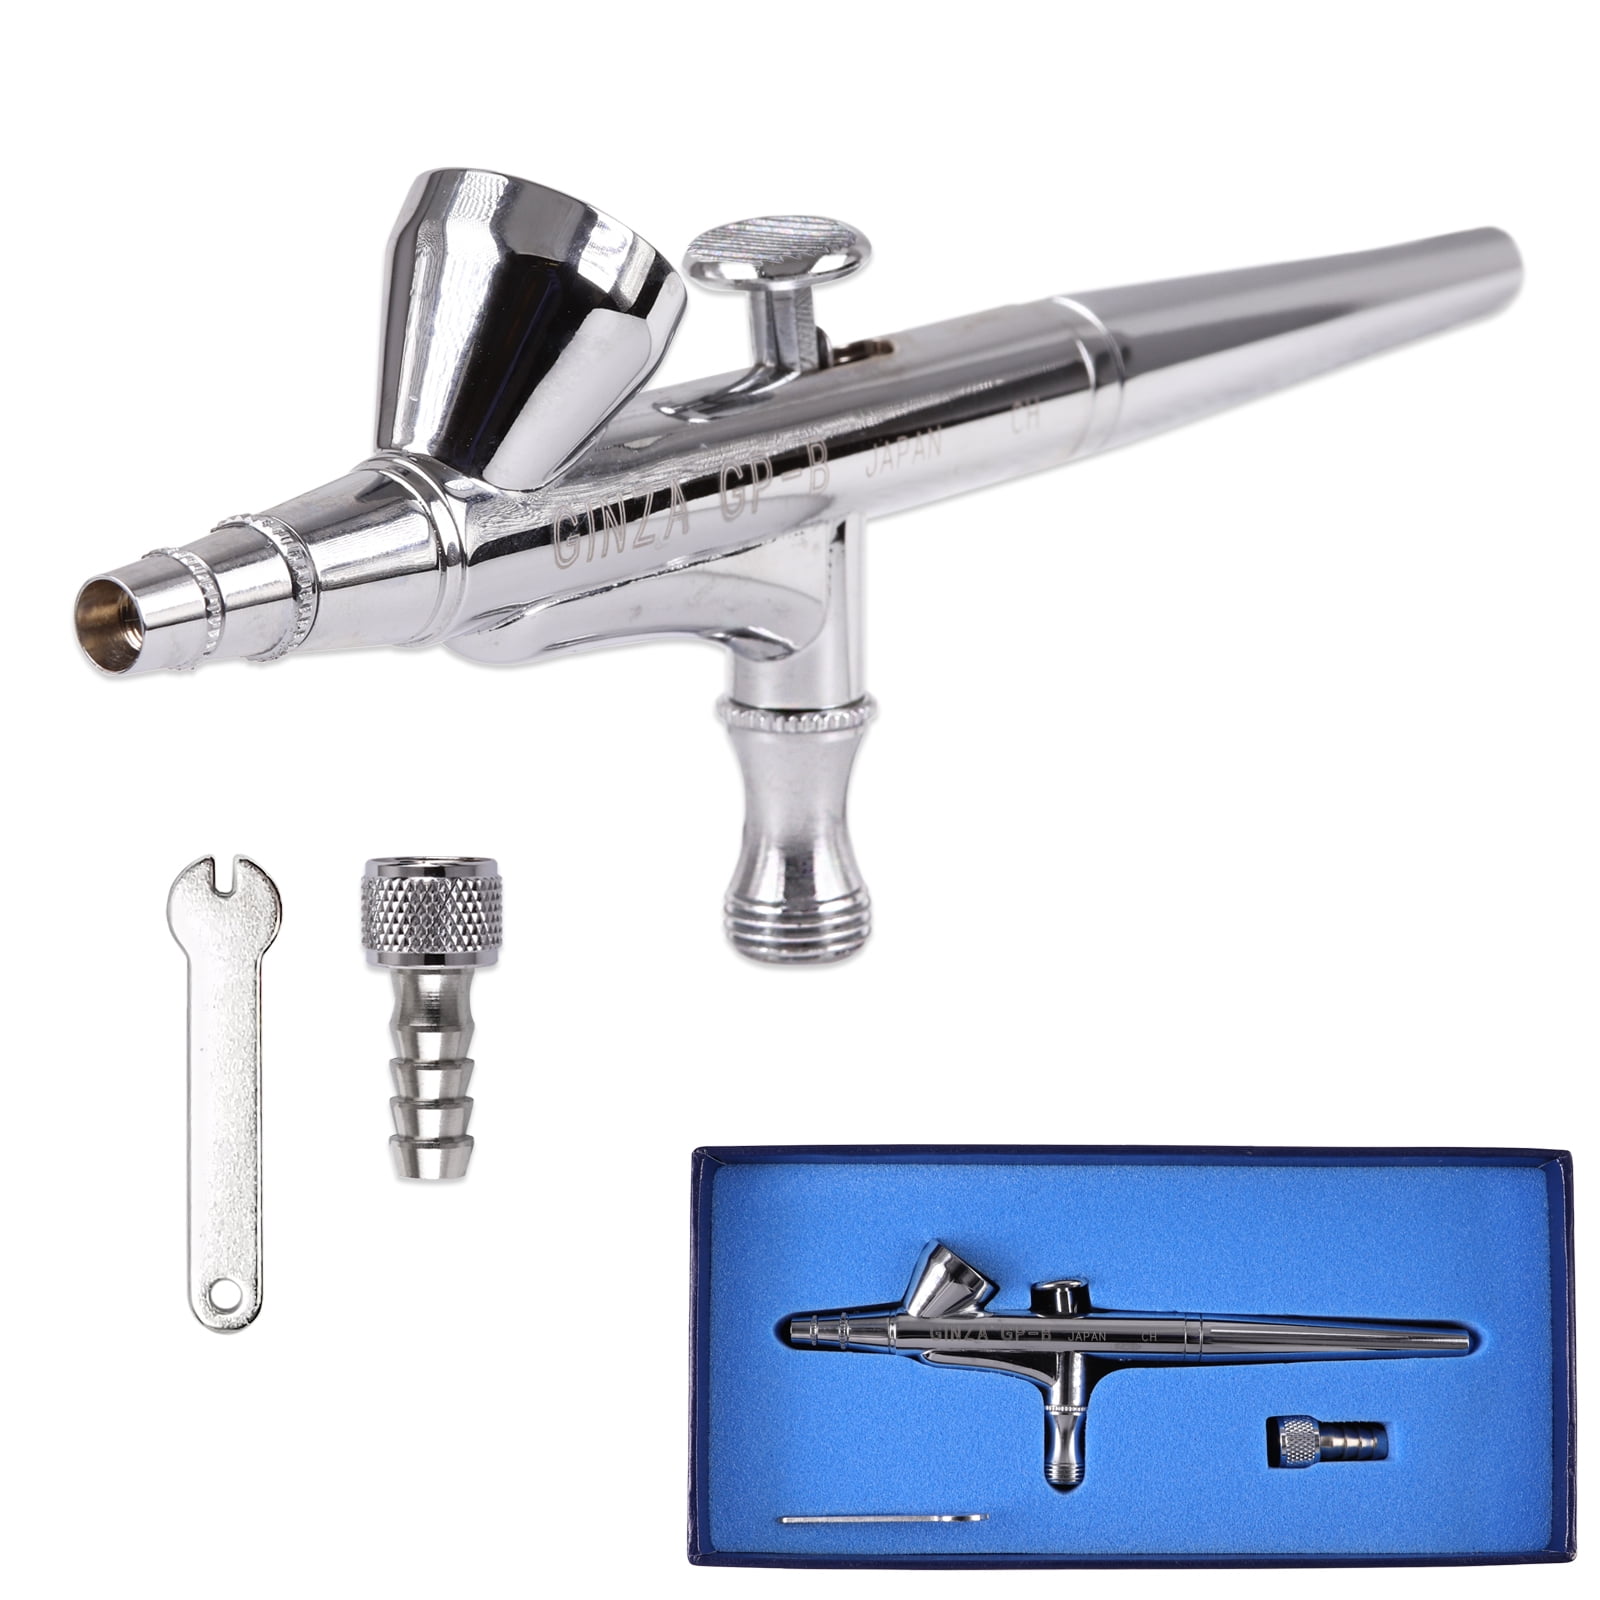 Master Elite Plus Airbrush 0.2 mm Needle, Nozzle and Fluid Tip Cap Set Only - Fits The Model 120 Master Elite Plus Airbrush - Fully Atomized Fine